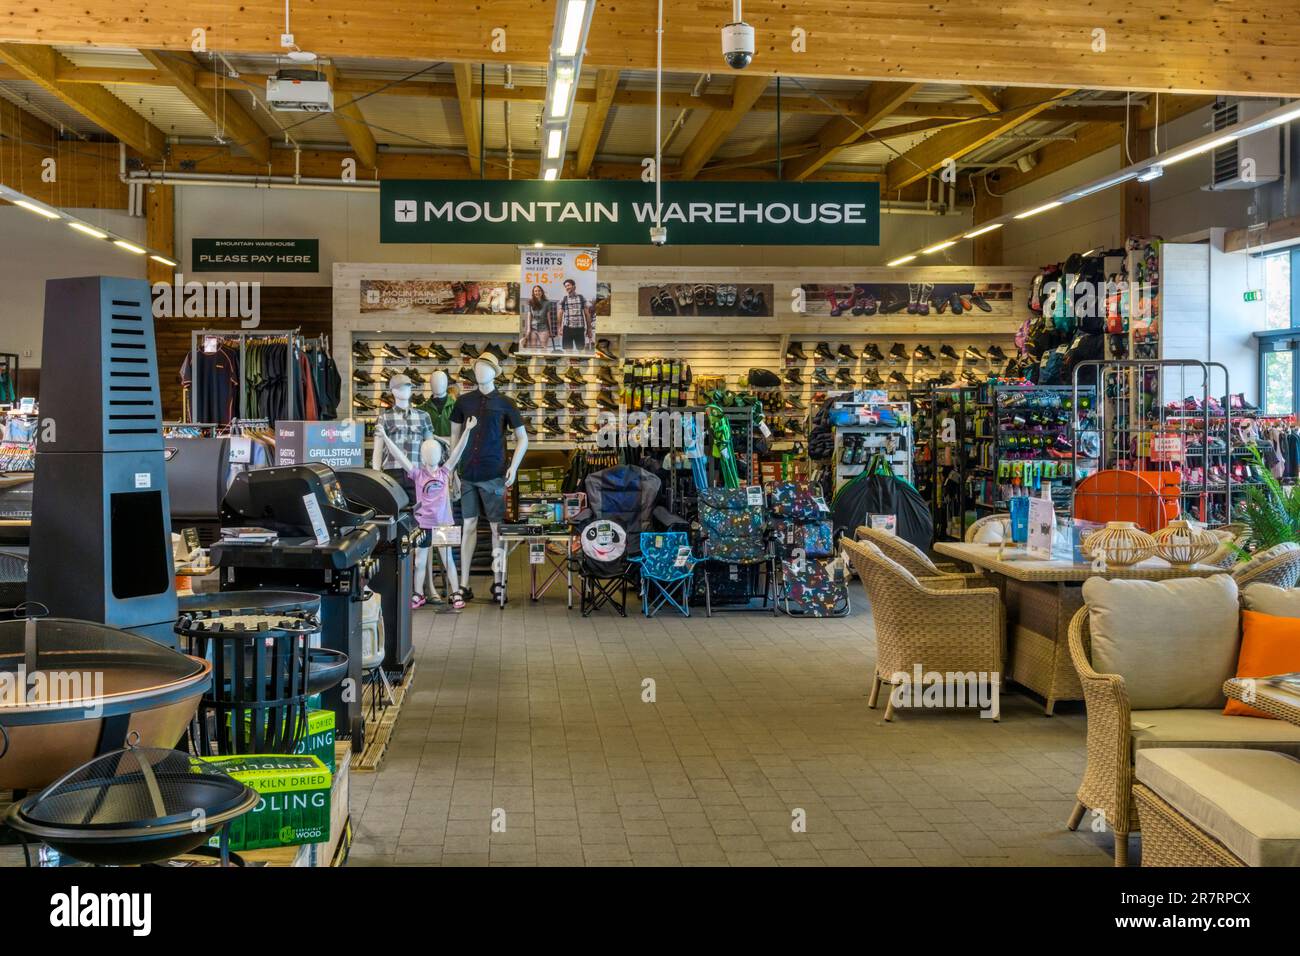 A branch of Mountain Warehouse outdoor clothing & equipment shops